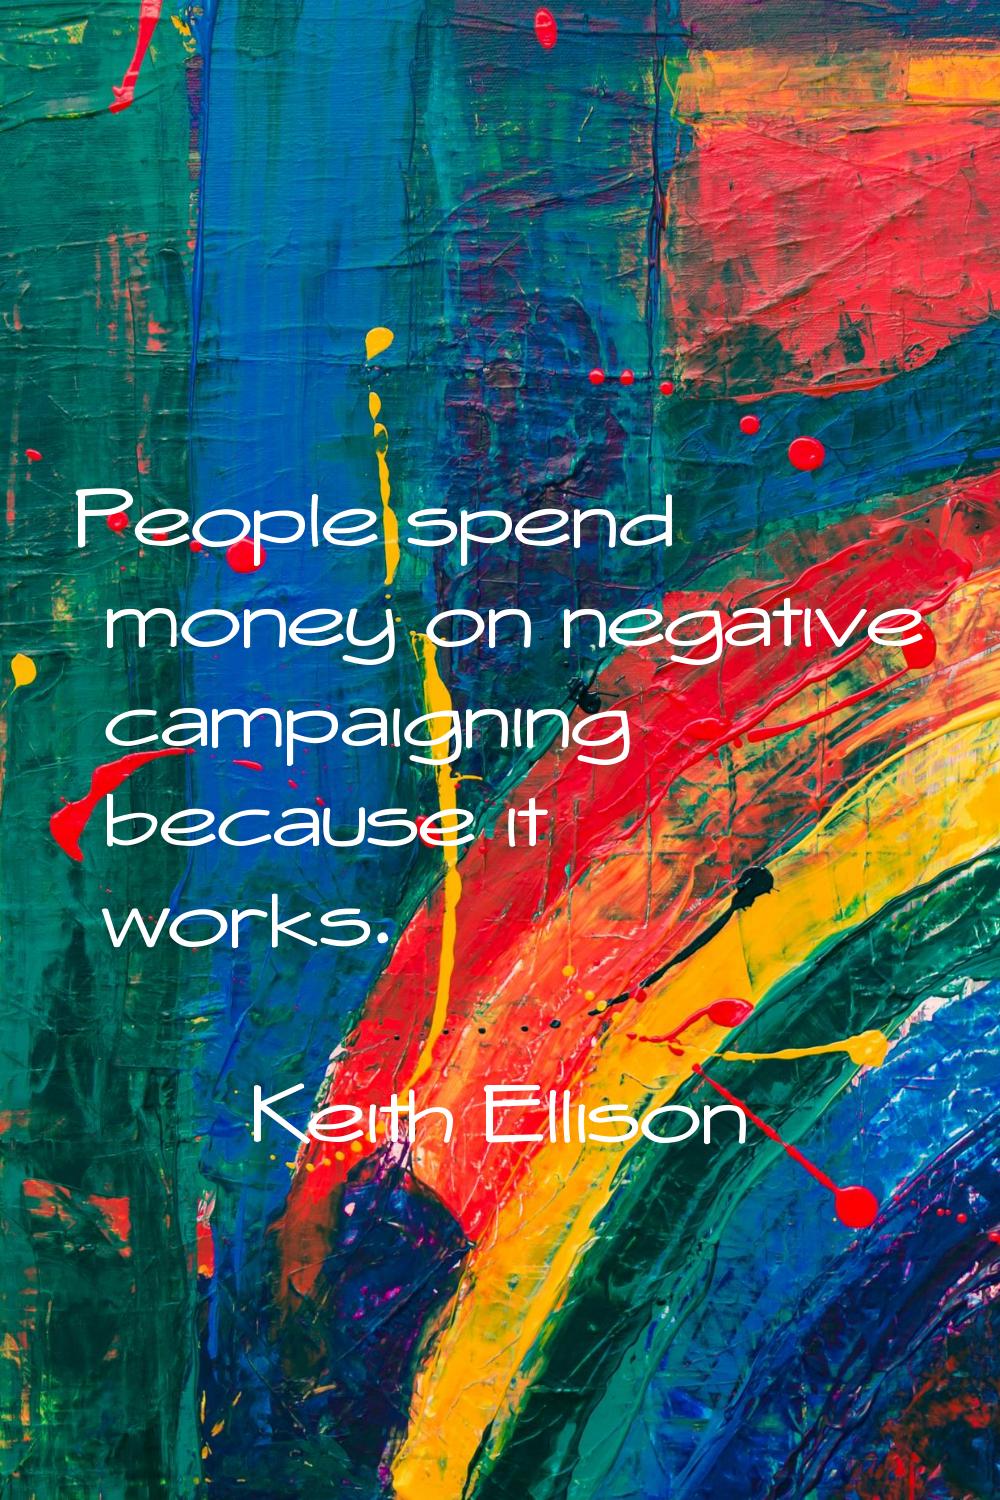 People spend money on negative campaigning because it works.